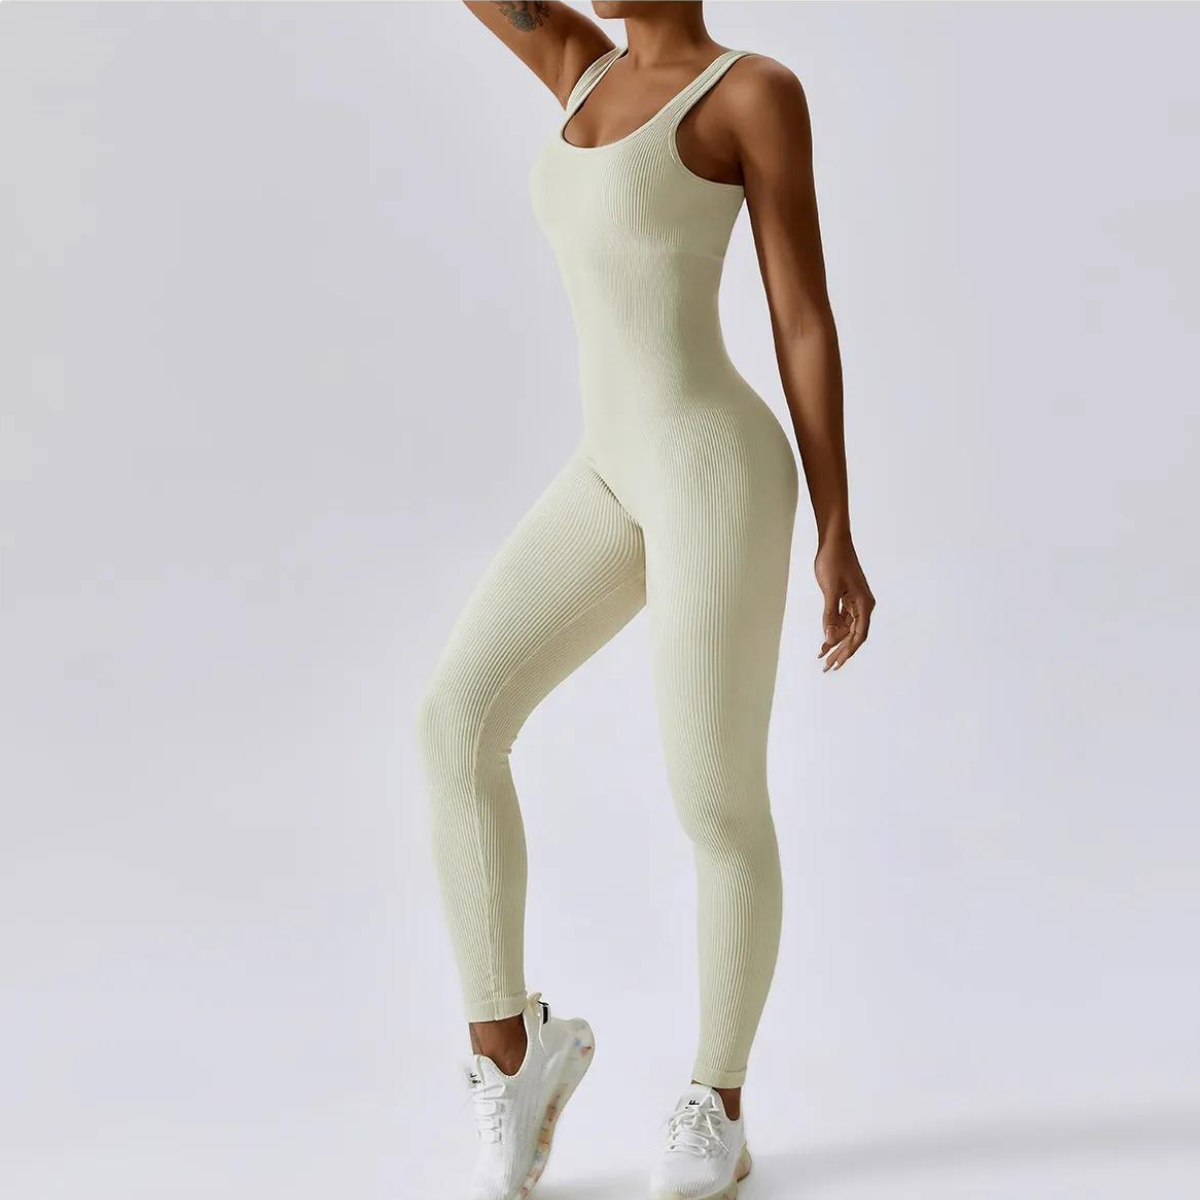 CosyMe All-Day Bodysuit